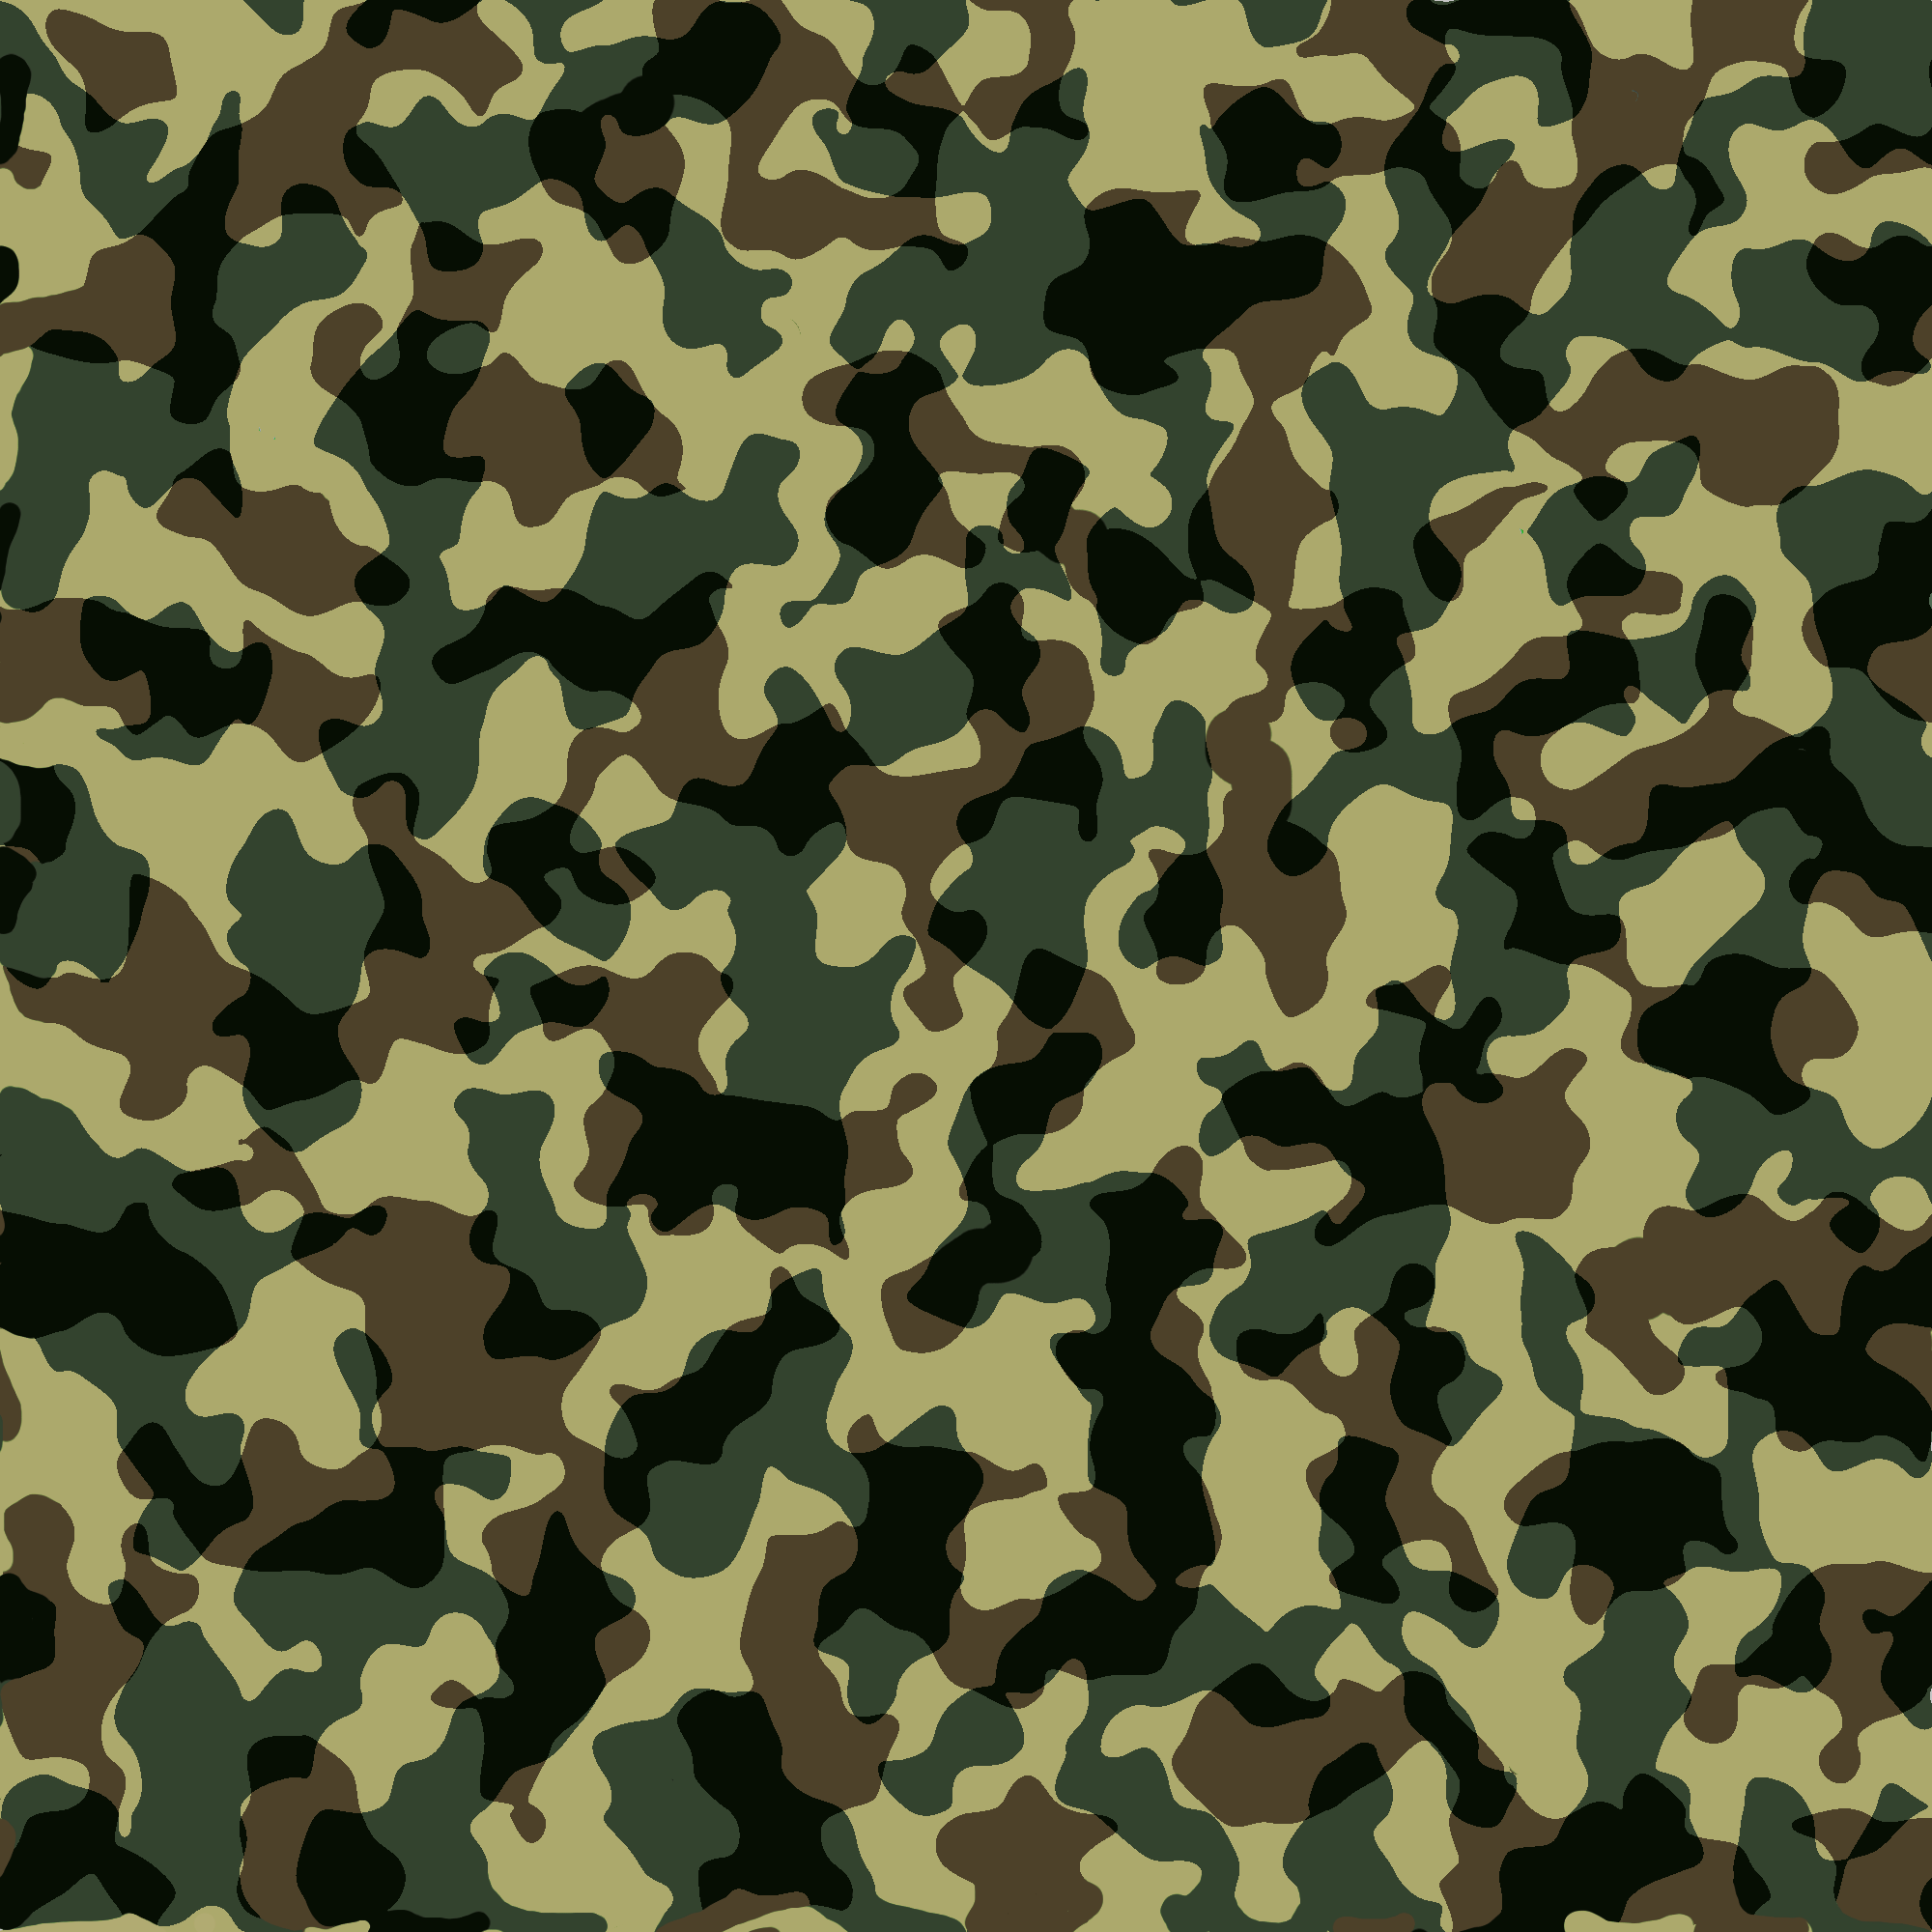 File:Camouflage pattern texture.png - Wikimedia Commons